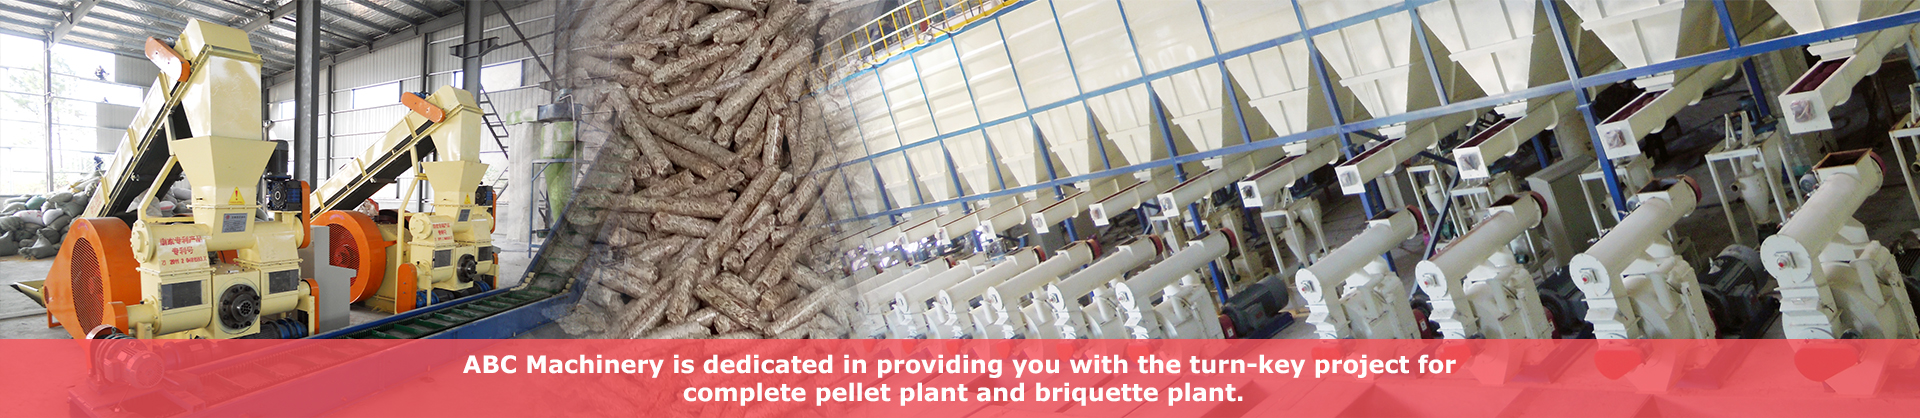 turnkey pellet plant and briquetting plant